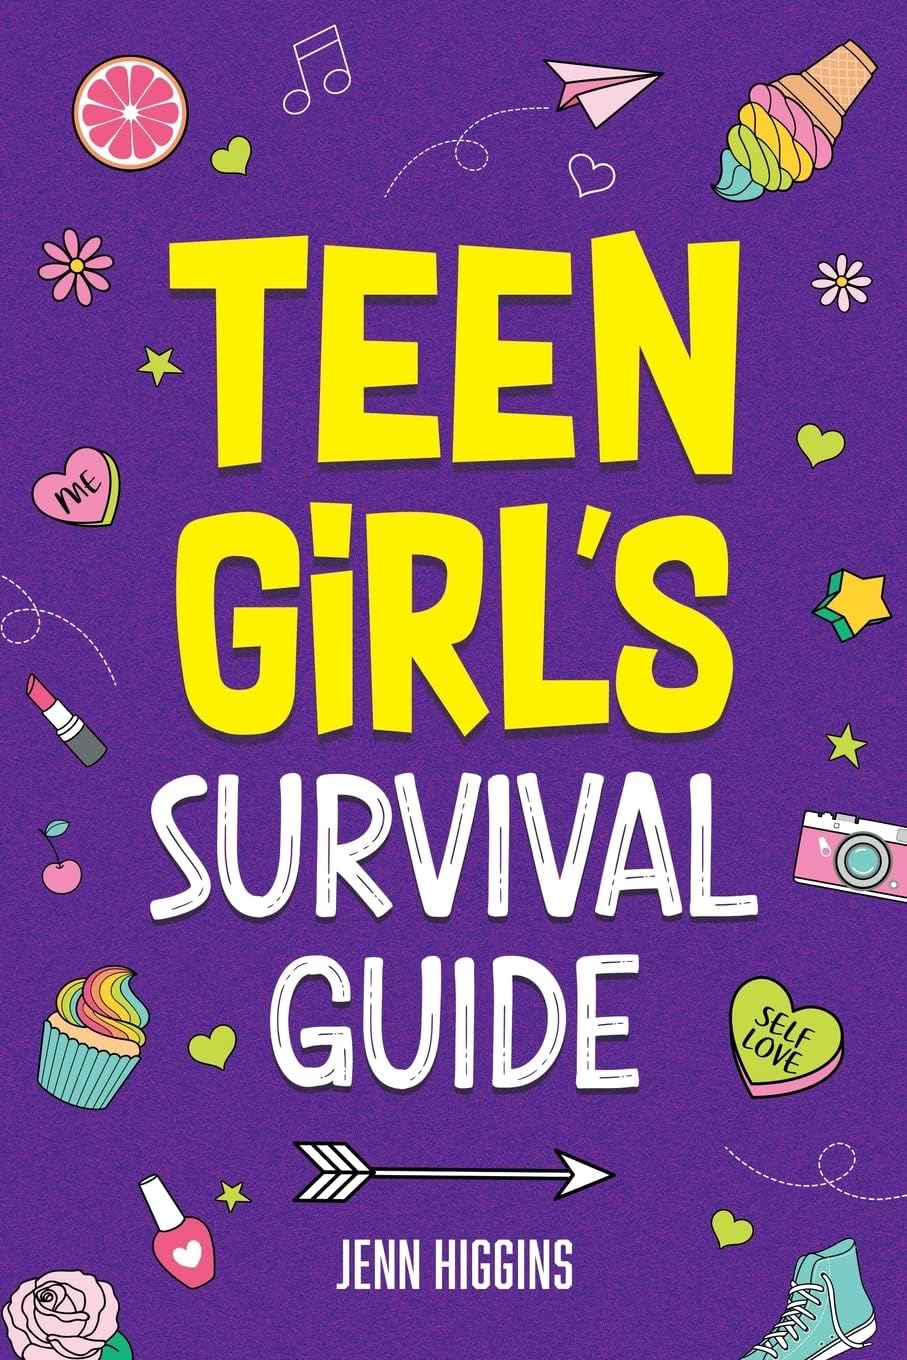 Teen Girl’s Survival Guide: How to Make Friends, Build Confidence, Avoid Peer Pressure, Overcome Challenges, Prepare for Your Future, and Just About Everything in Between